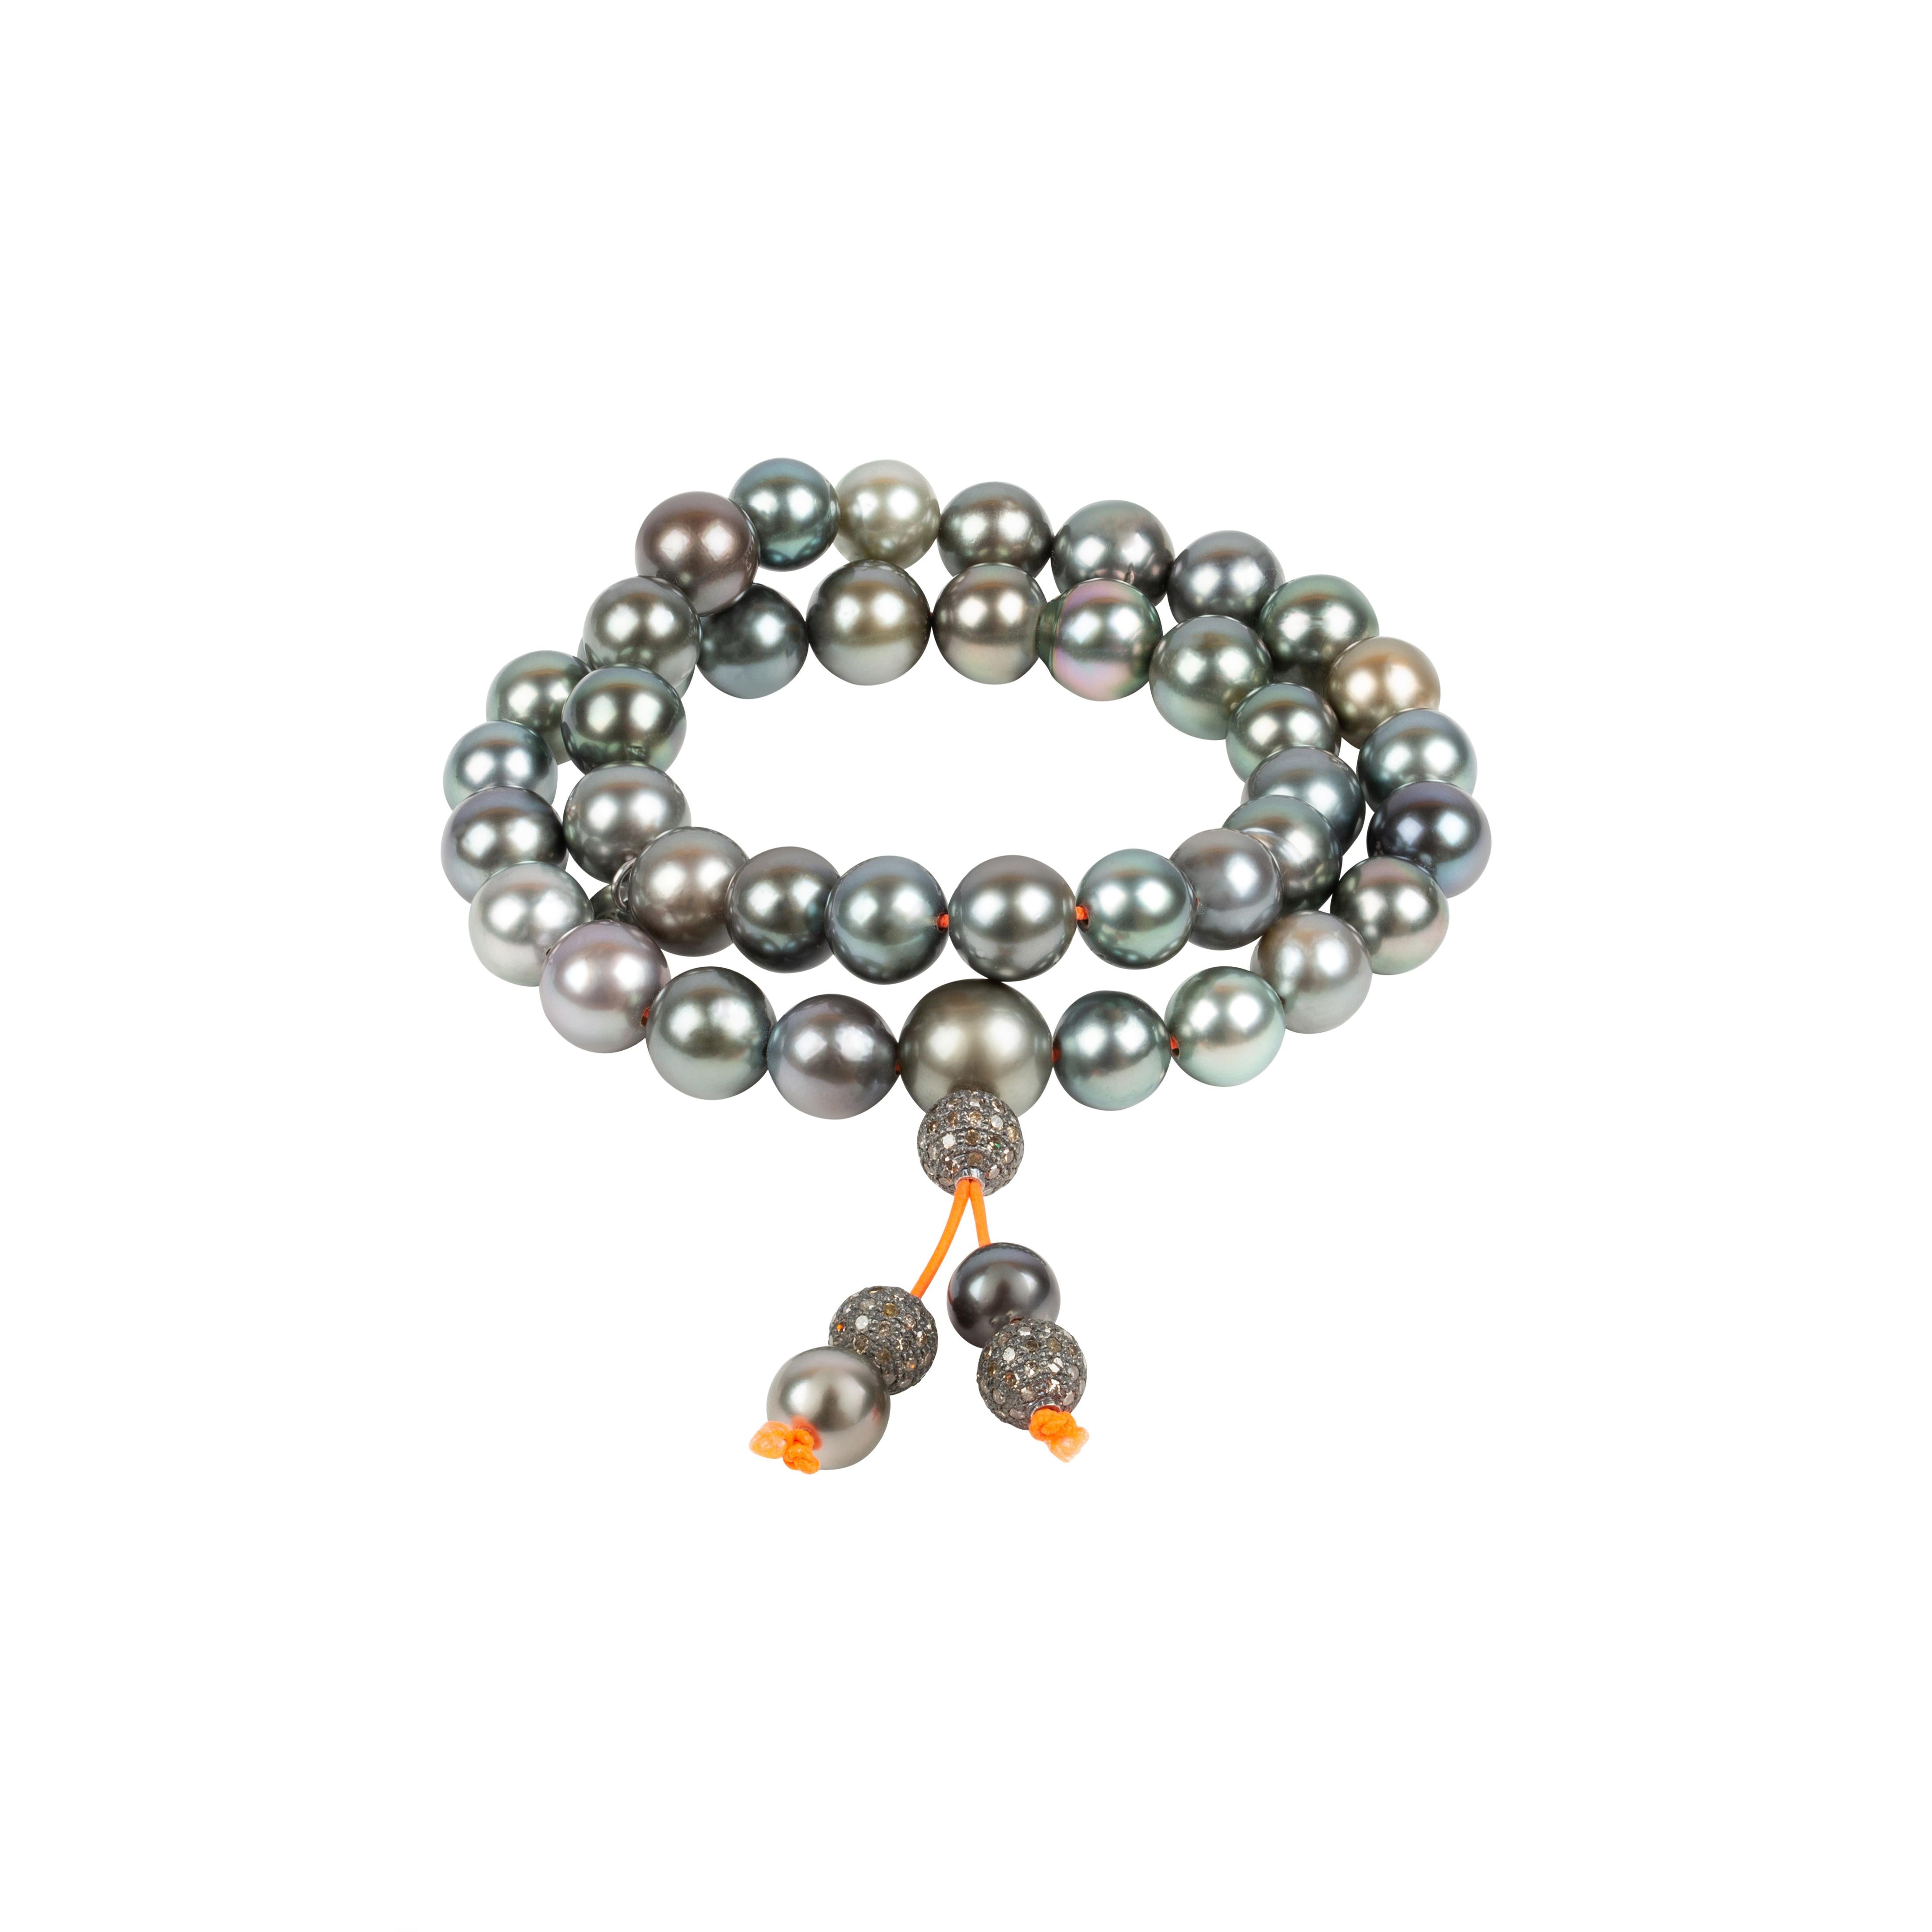 This special jewelry piece is inspired by the Buddhist prayer necklaces/ bracelets. 
It can be worn as a shorter necklace or wrapped around the wrist. Its intriguing Tahiti pearls are captivating, its elegance and casualness are amazing and you can